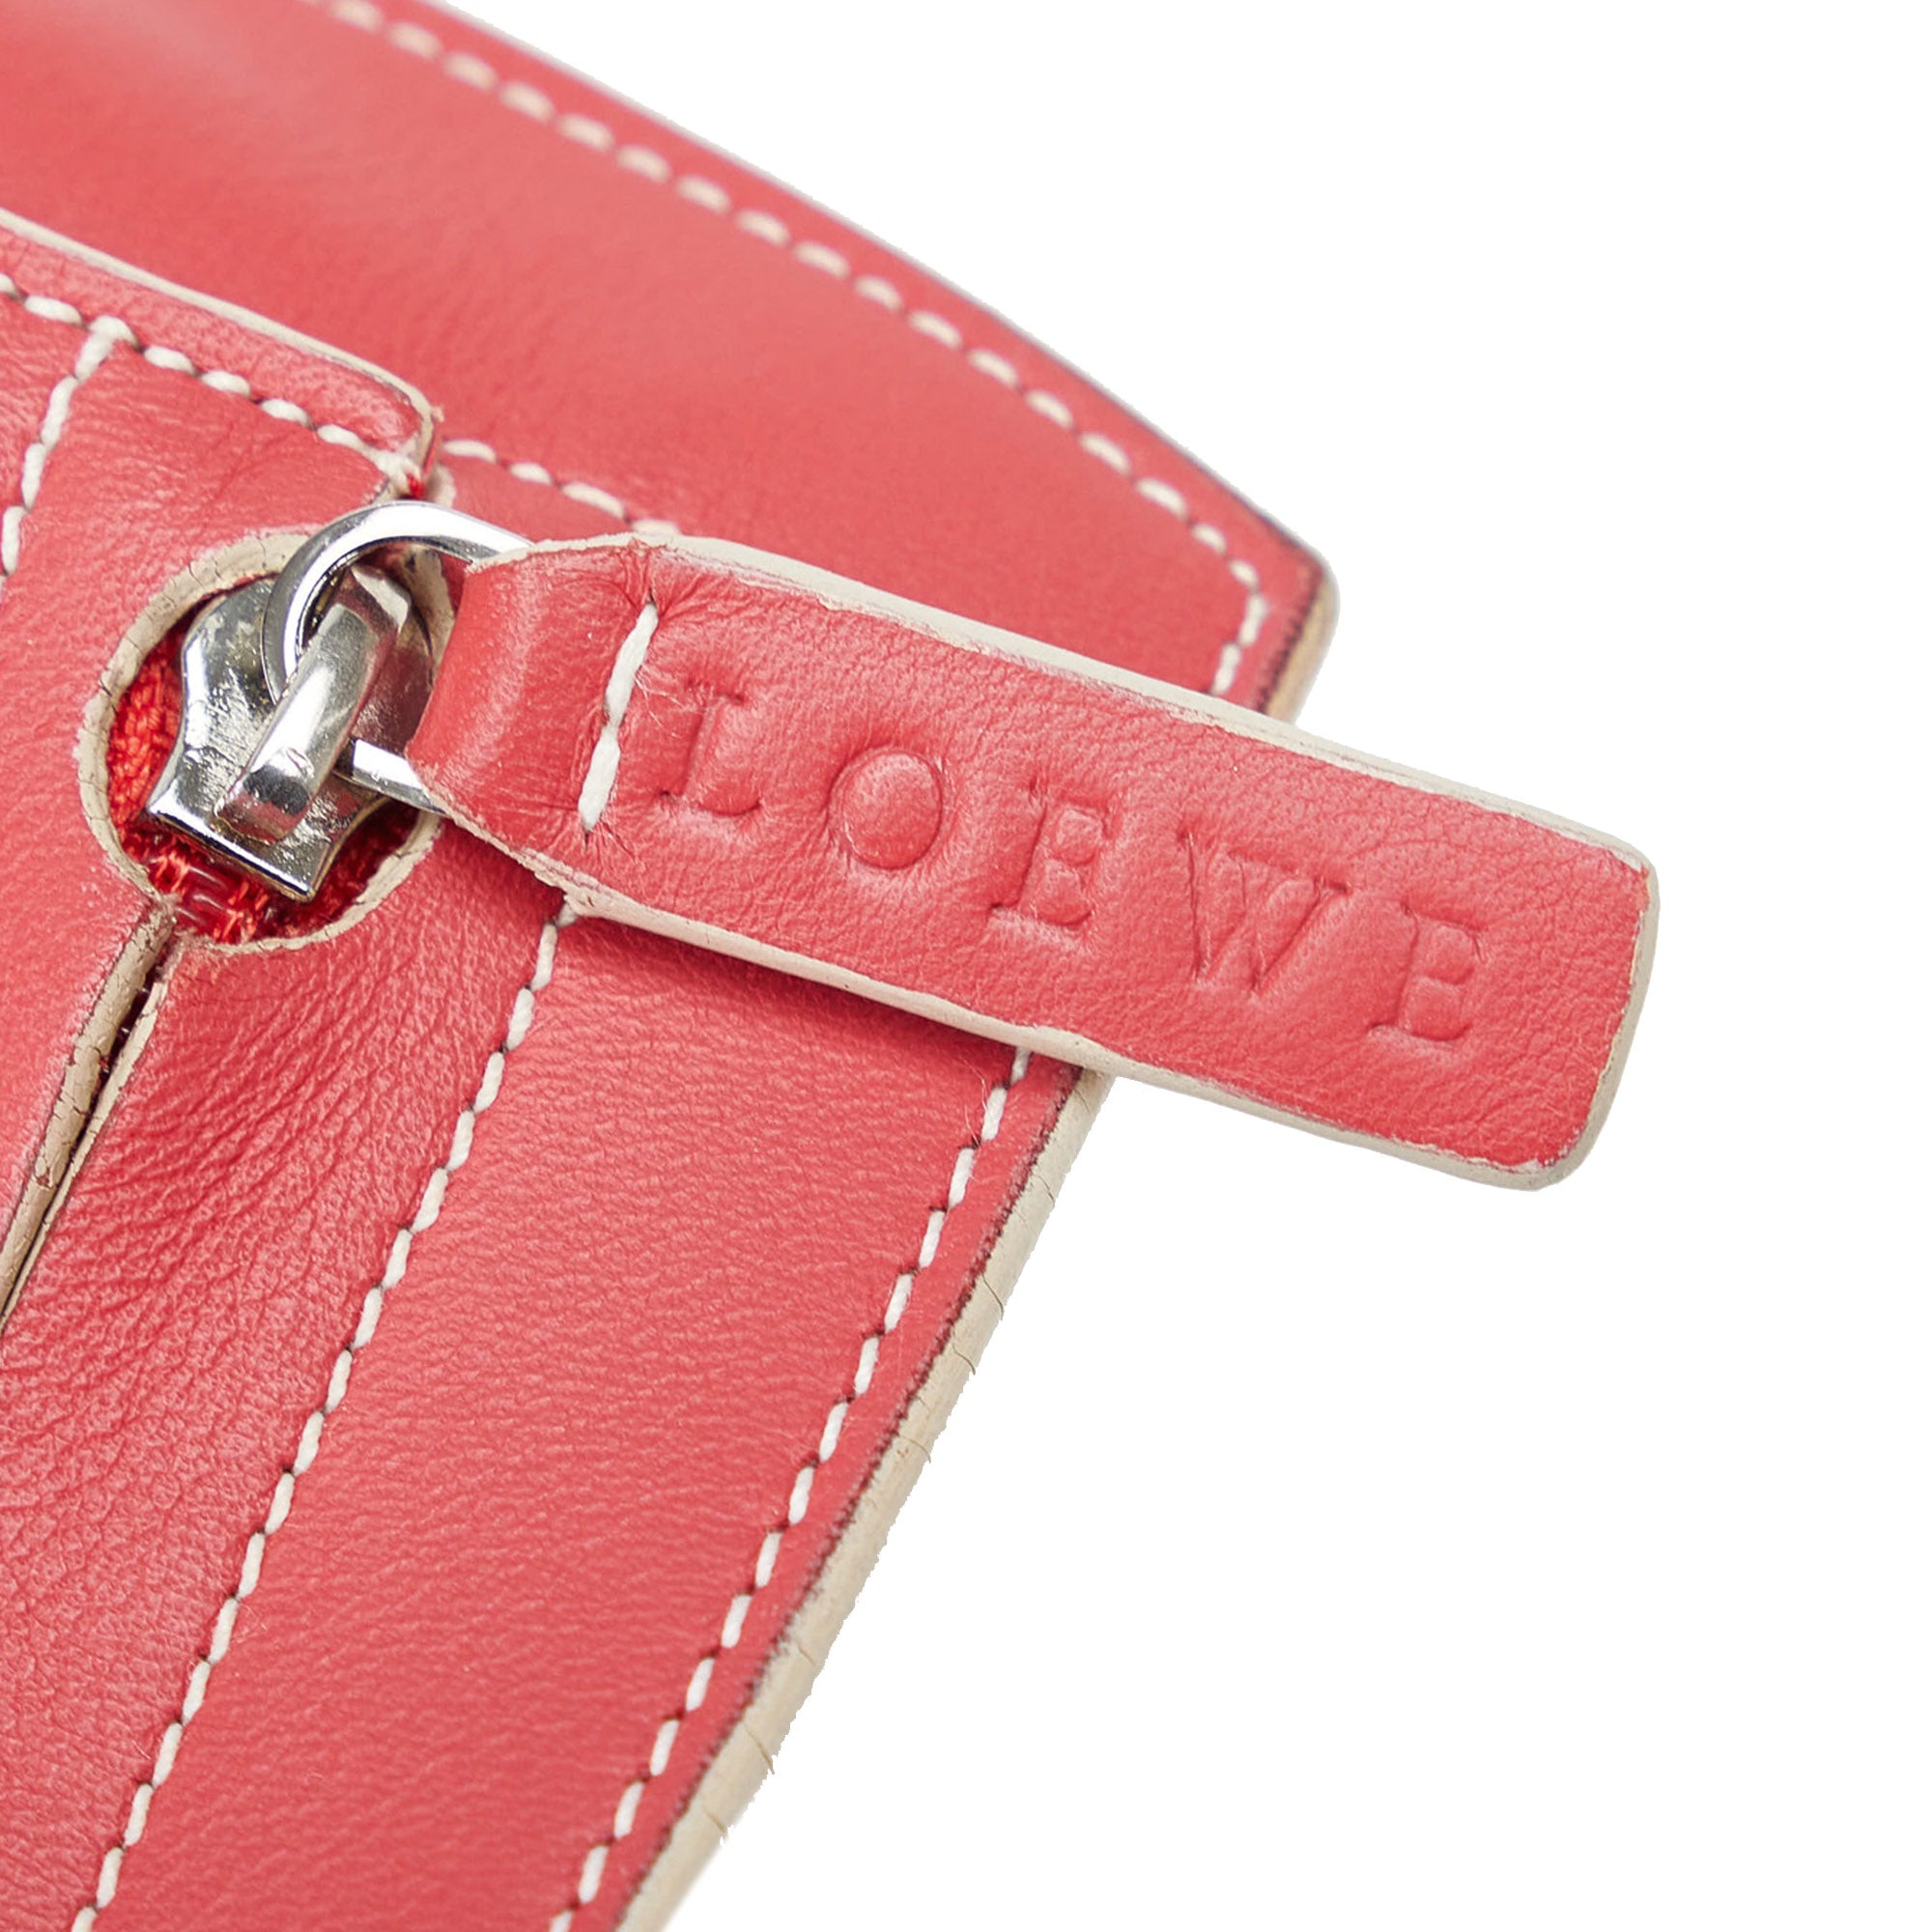 peek at my Loewe Puzzle bag in March, Pink Loewe Leather Pouch